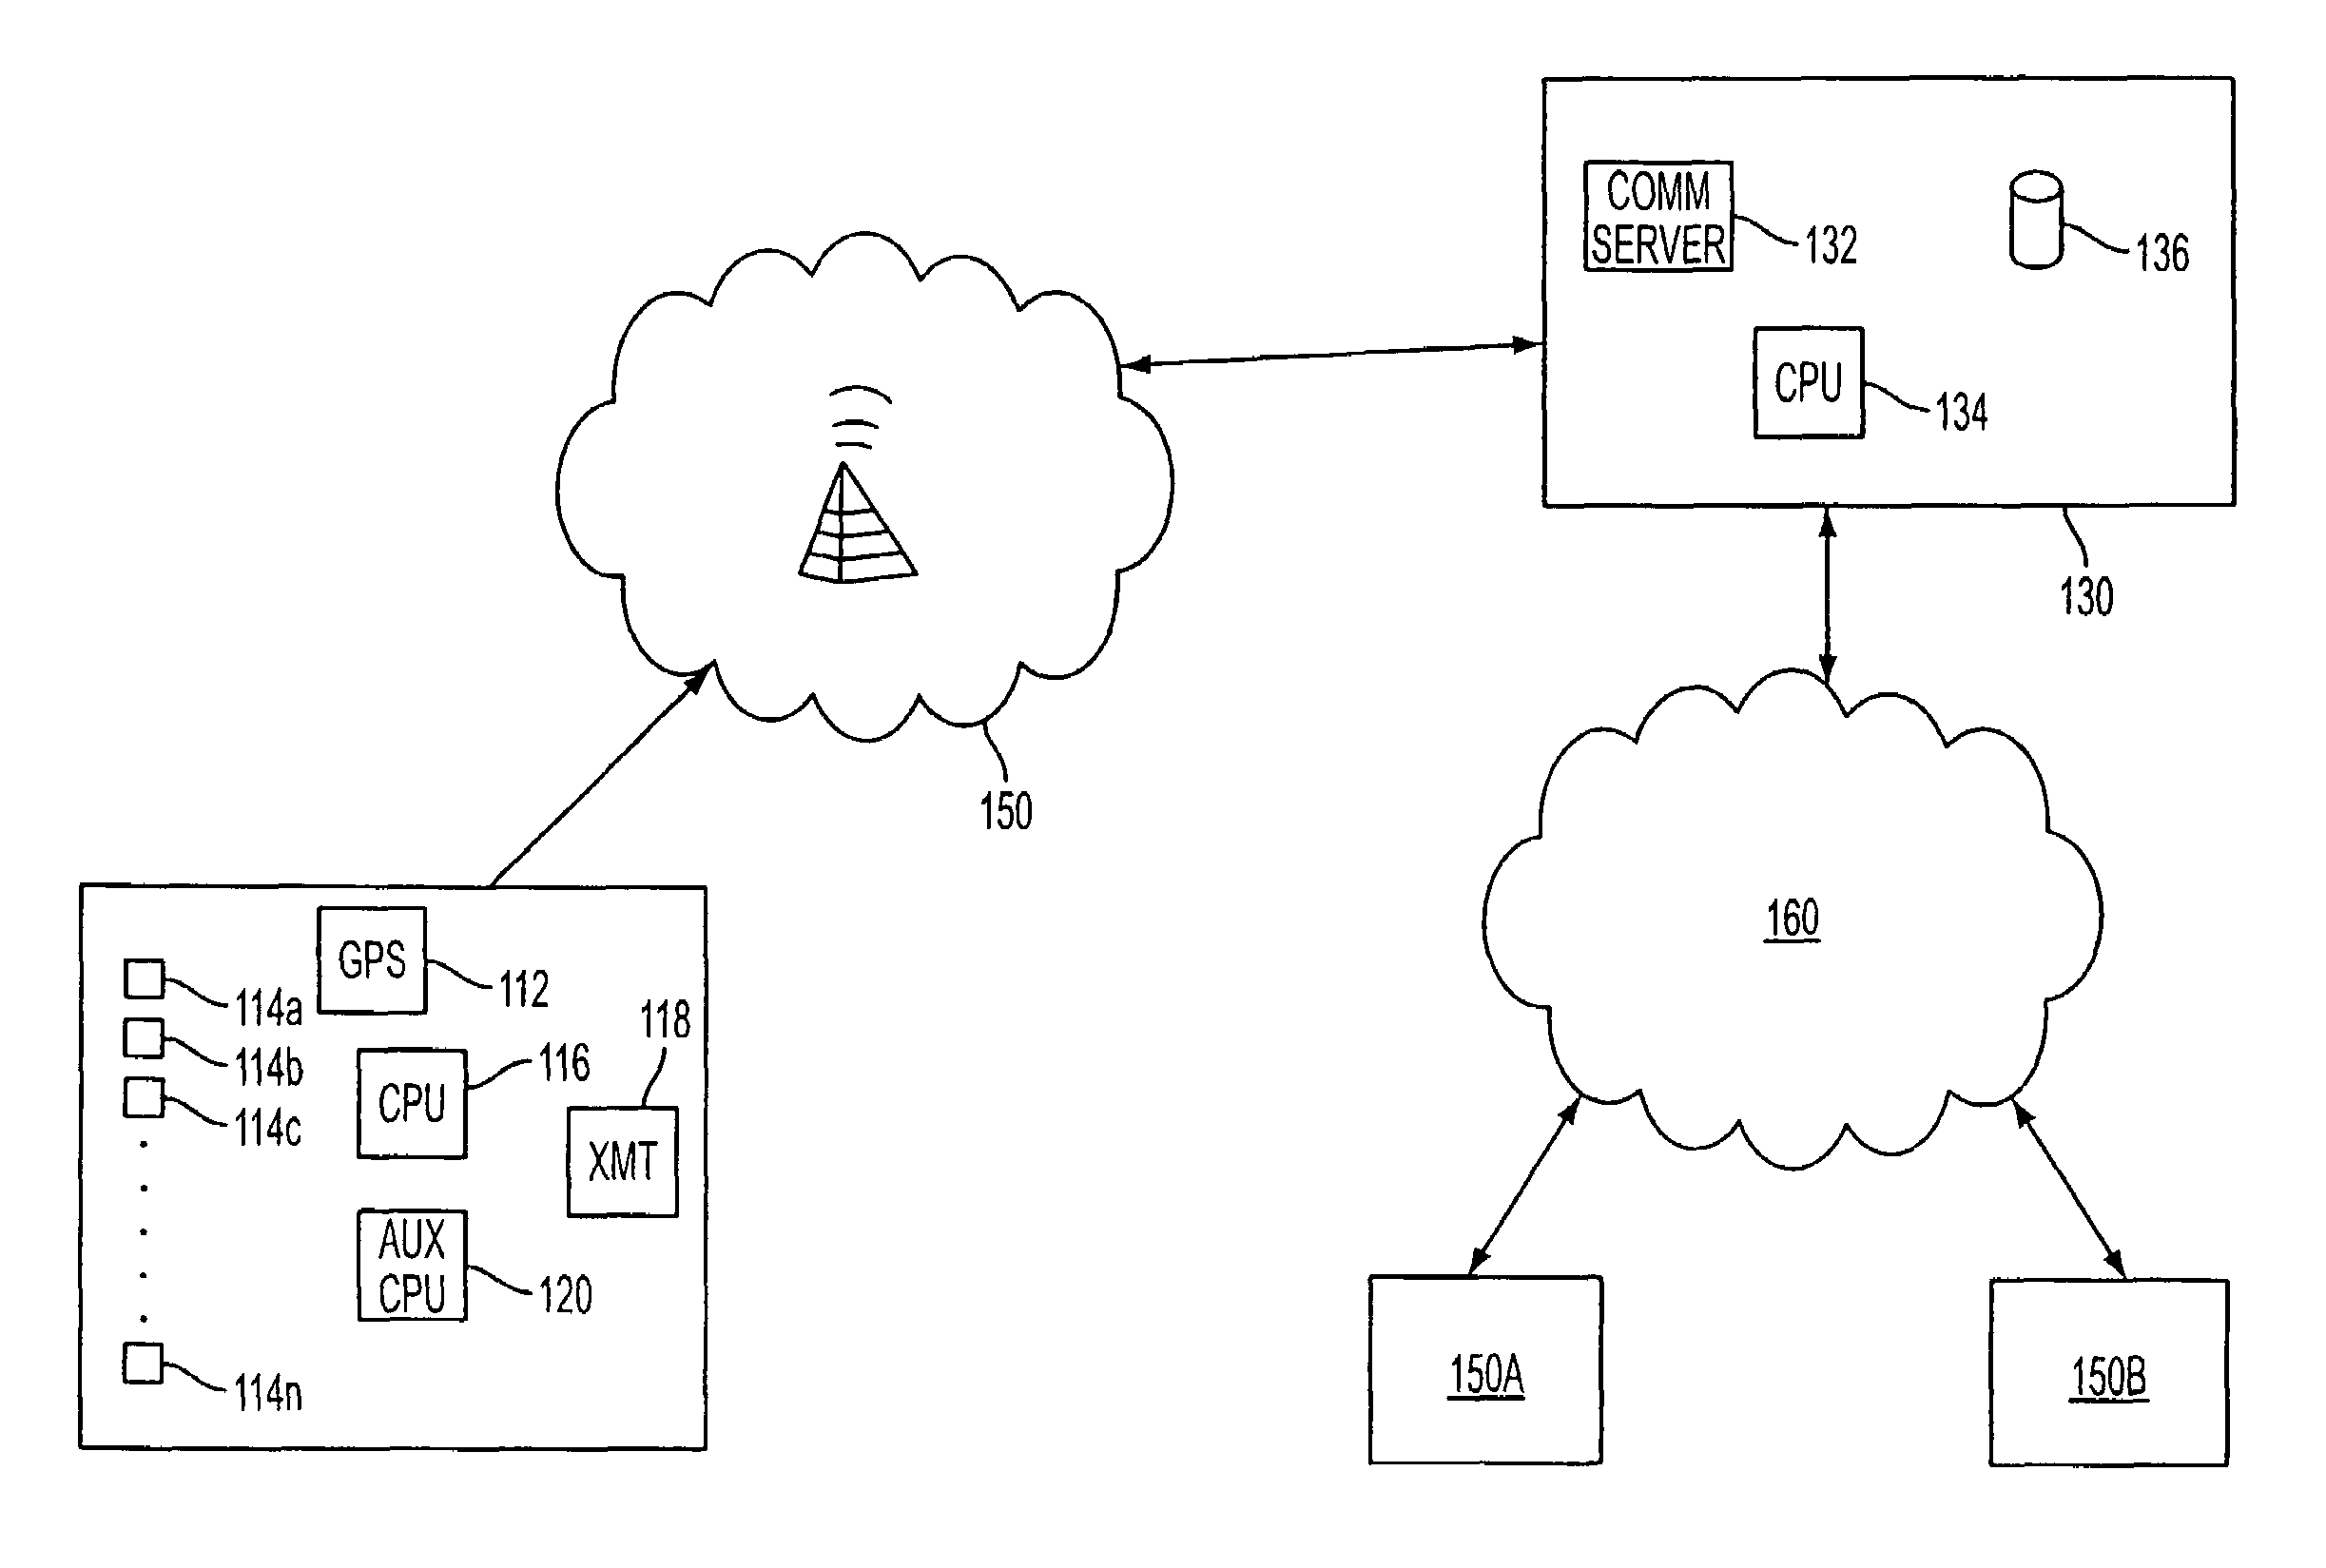 System and method for real-time management of mobile resources